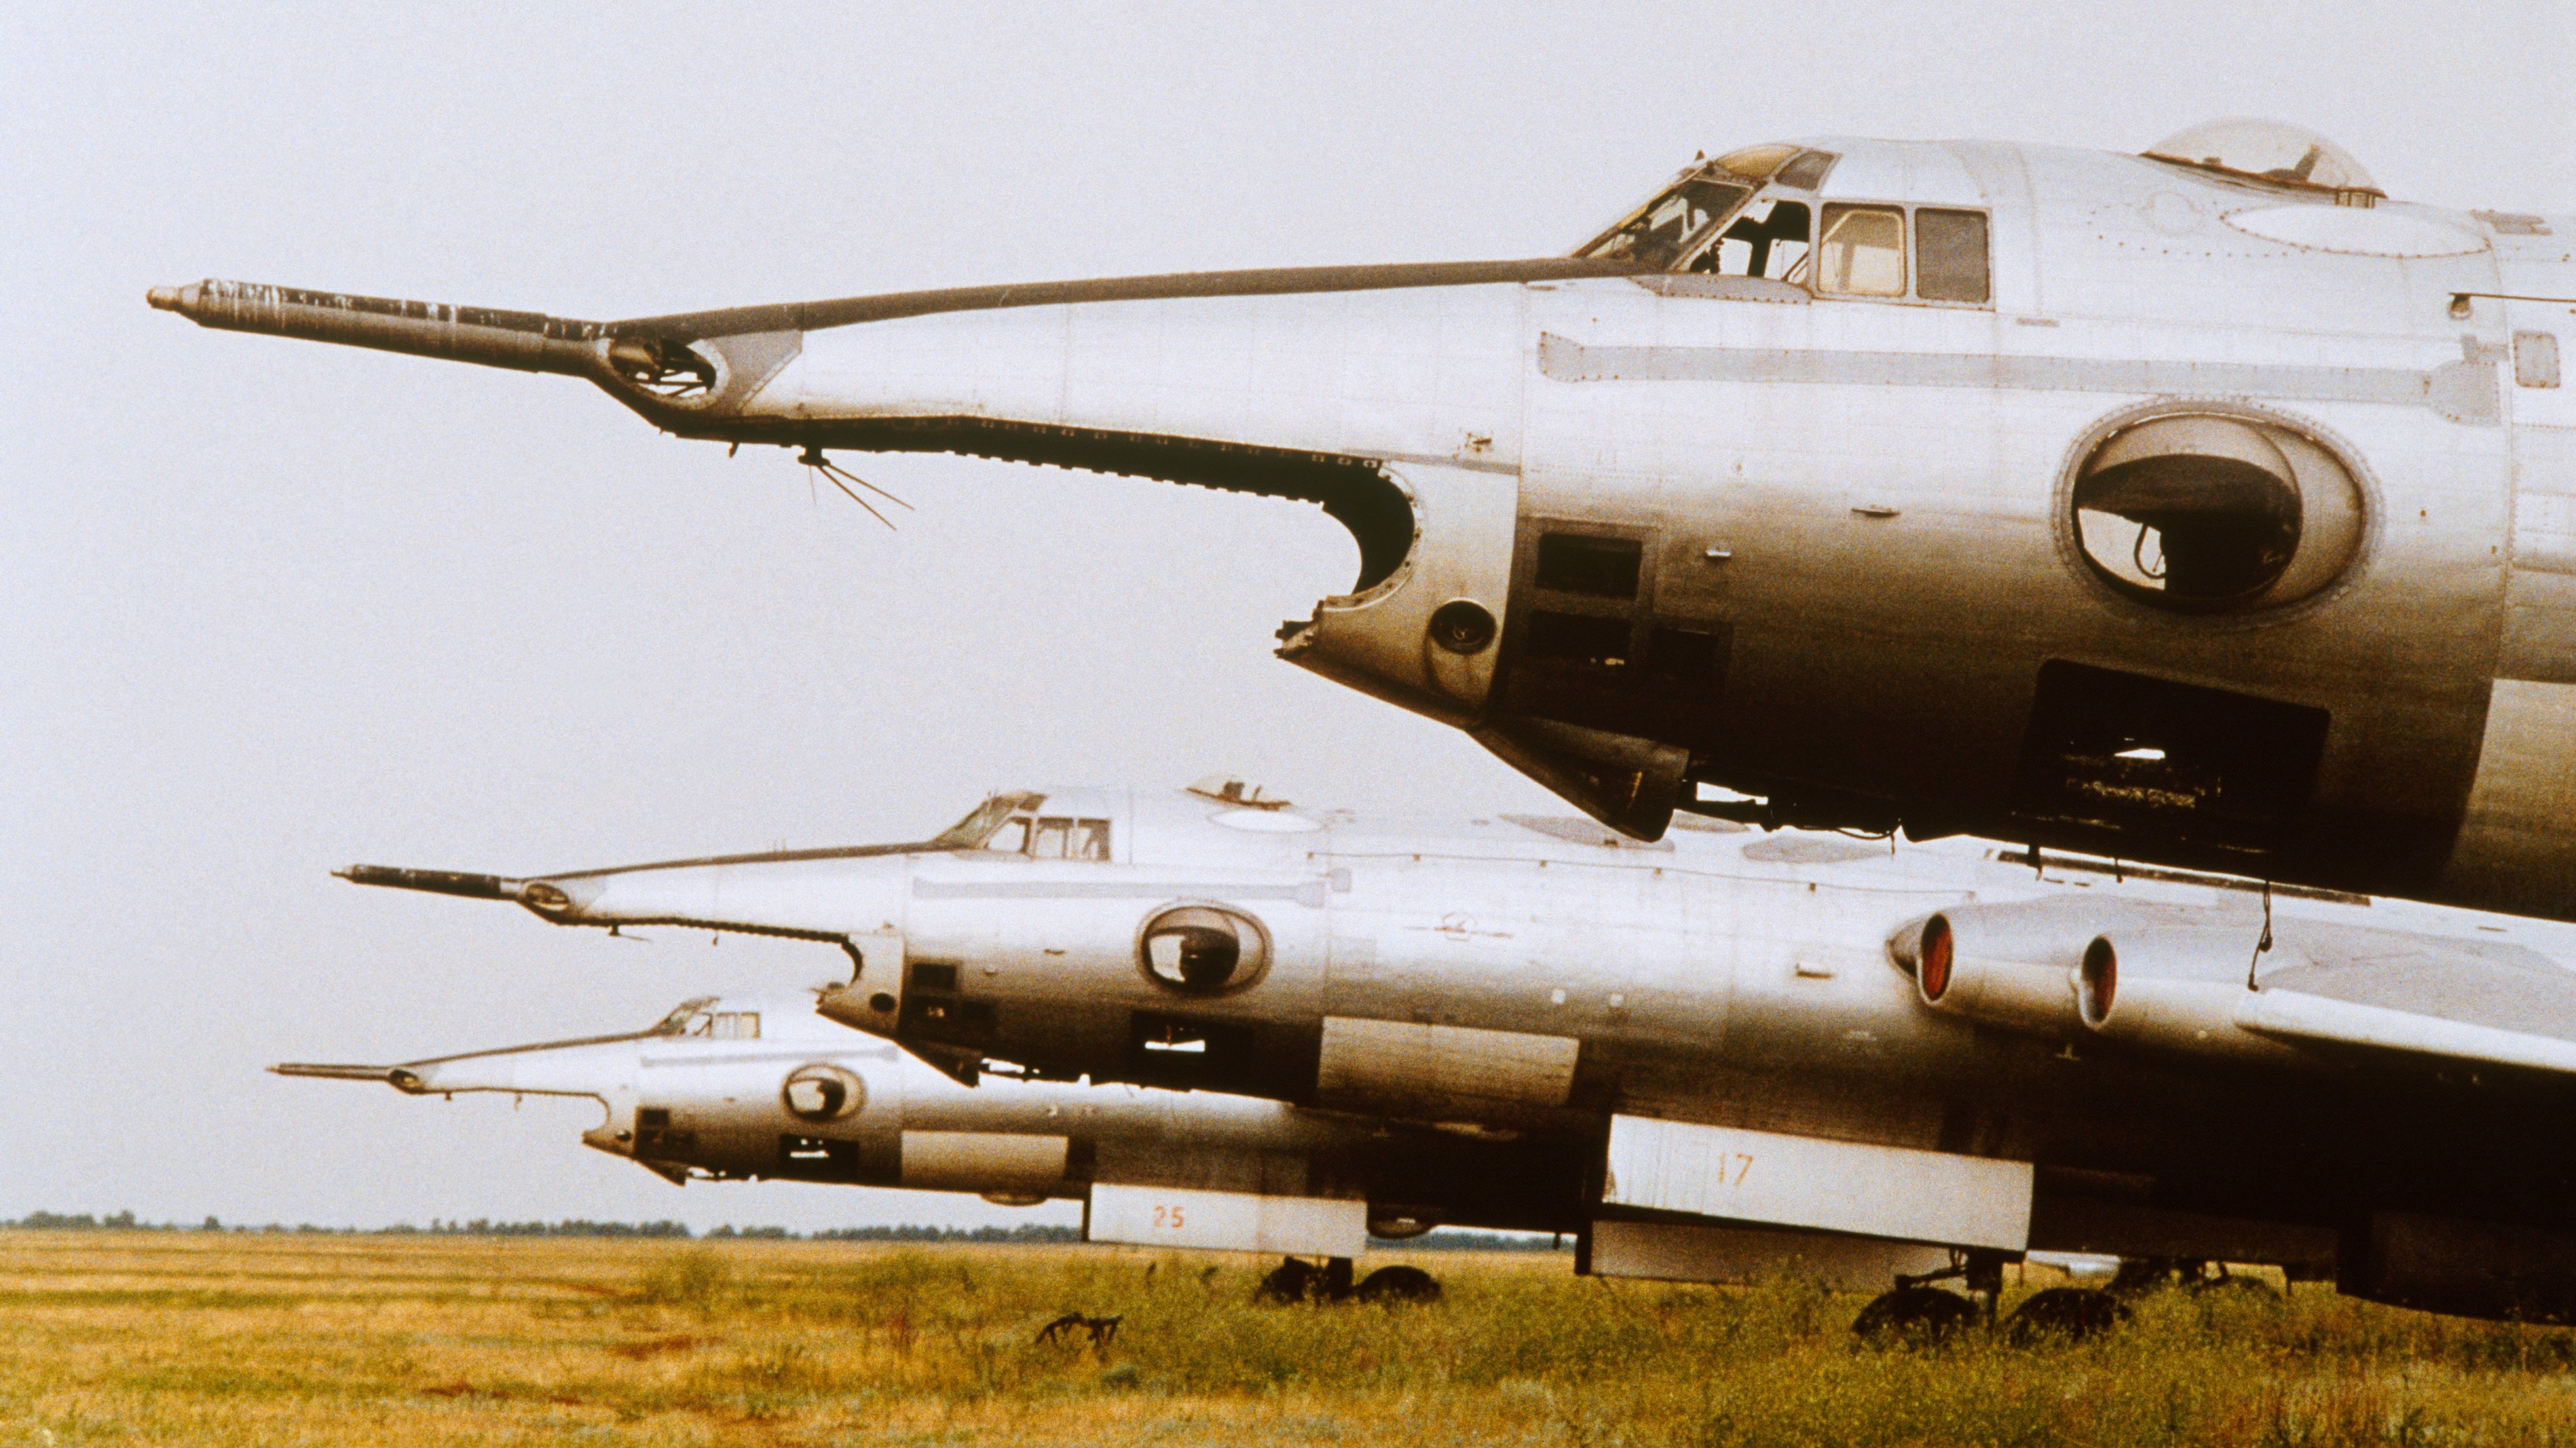 Military Jets of USSR being Dismantled at Engels Air Base